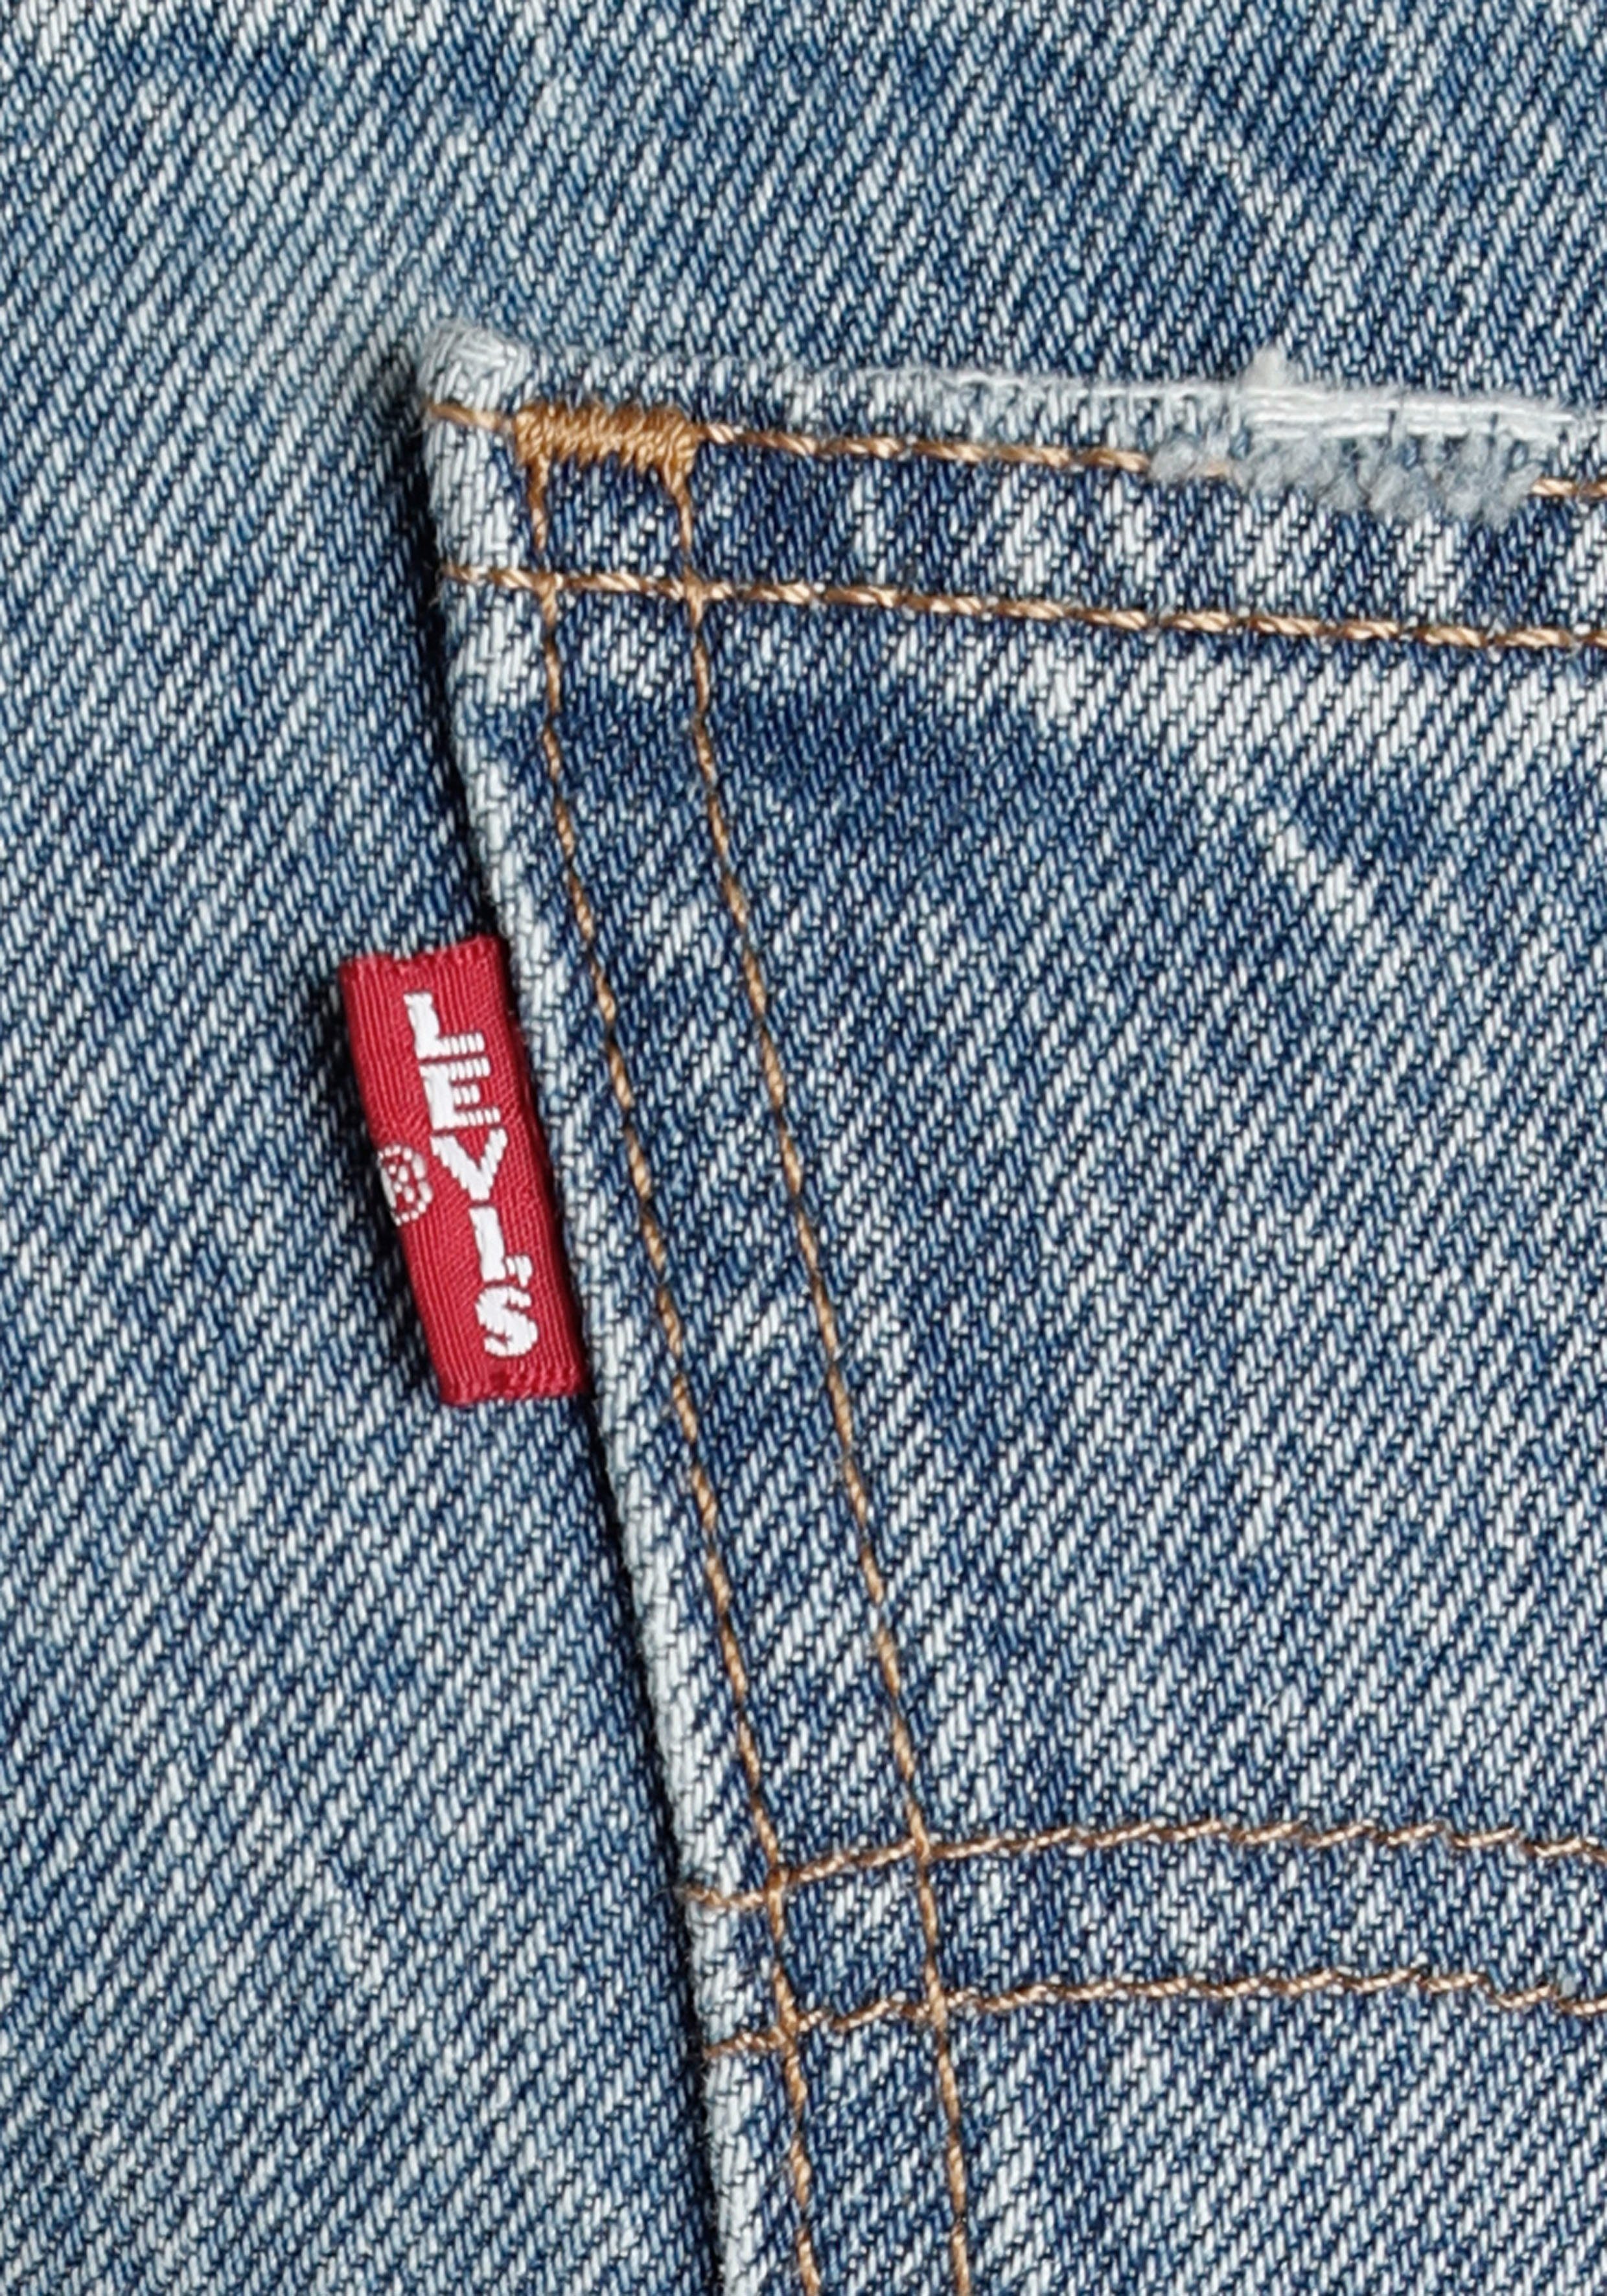 Levi's® Gerade Jeans blue used STRAIGHT MIDDY light